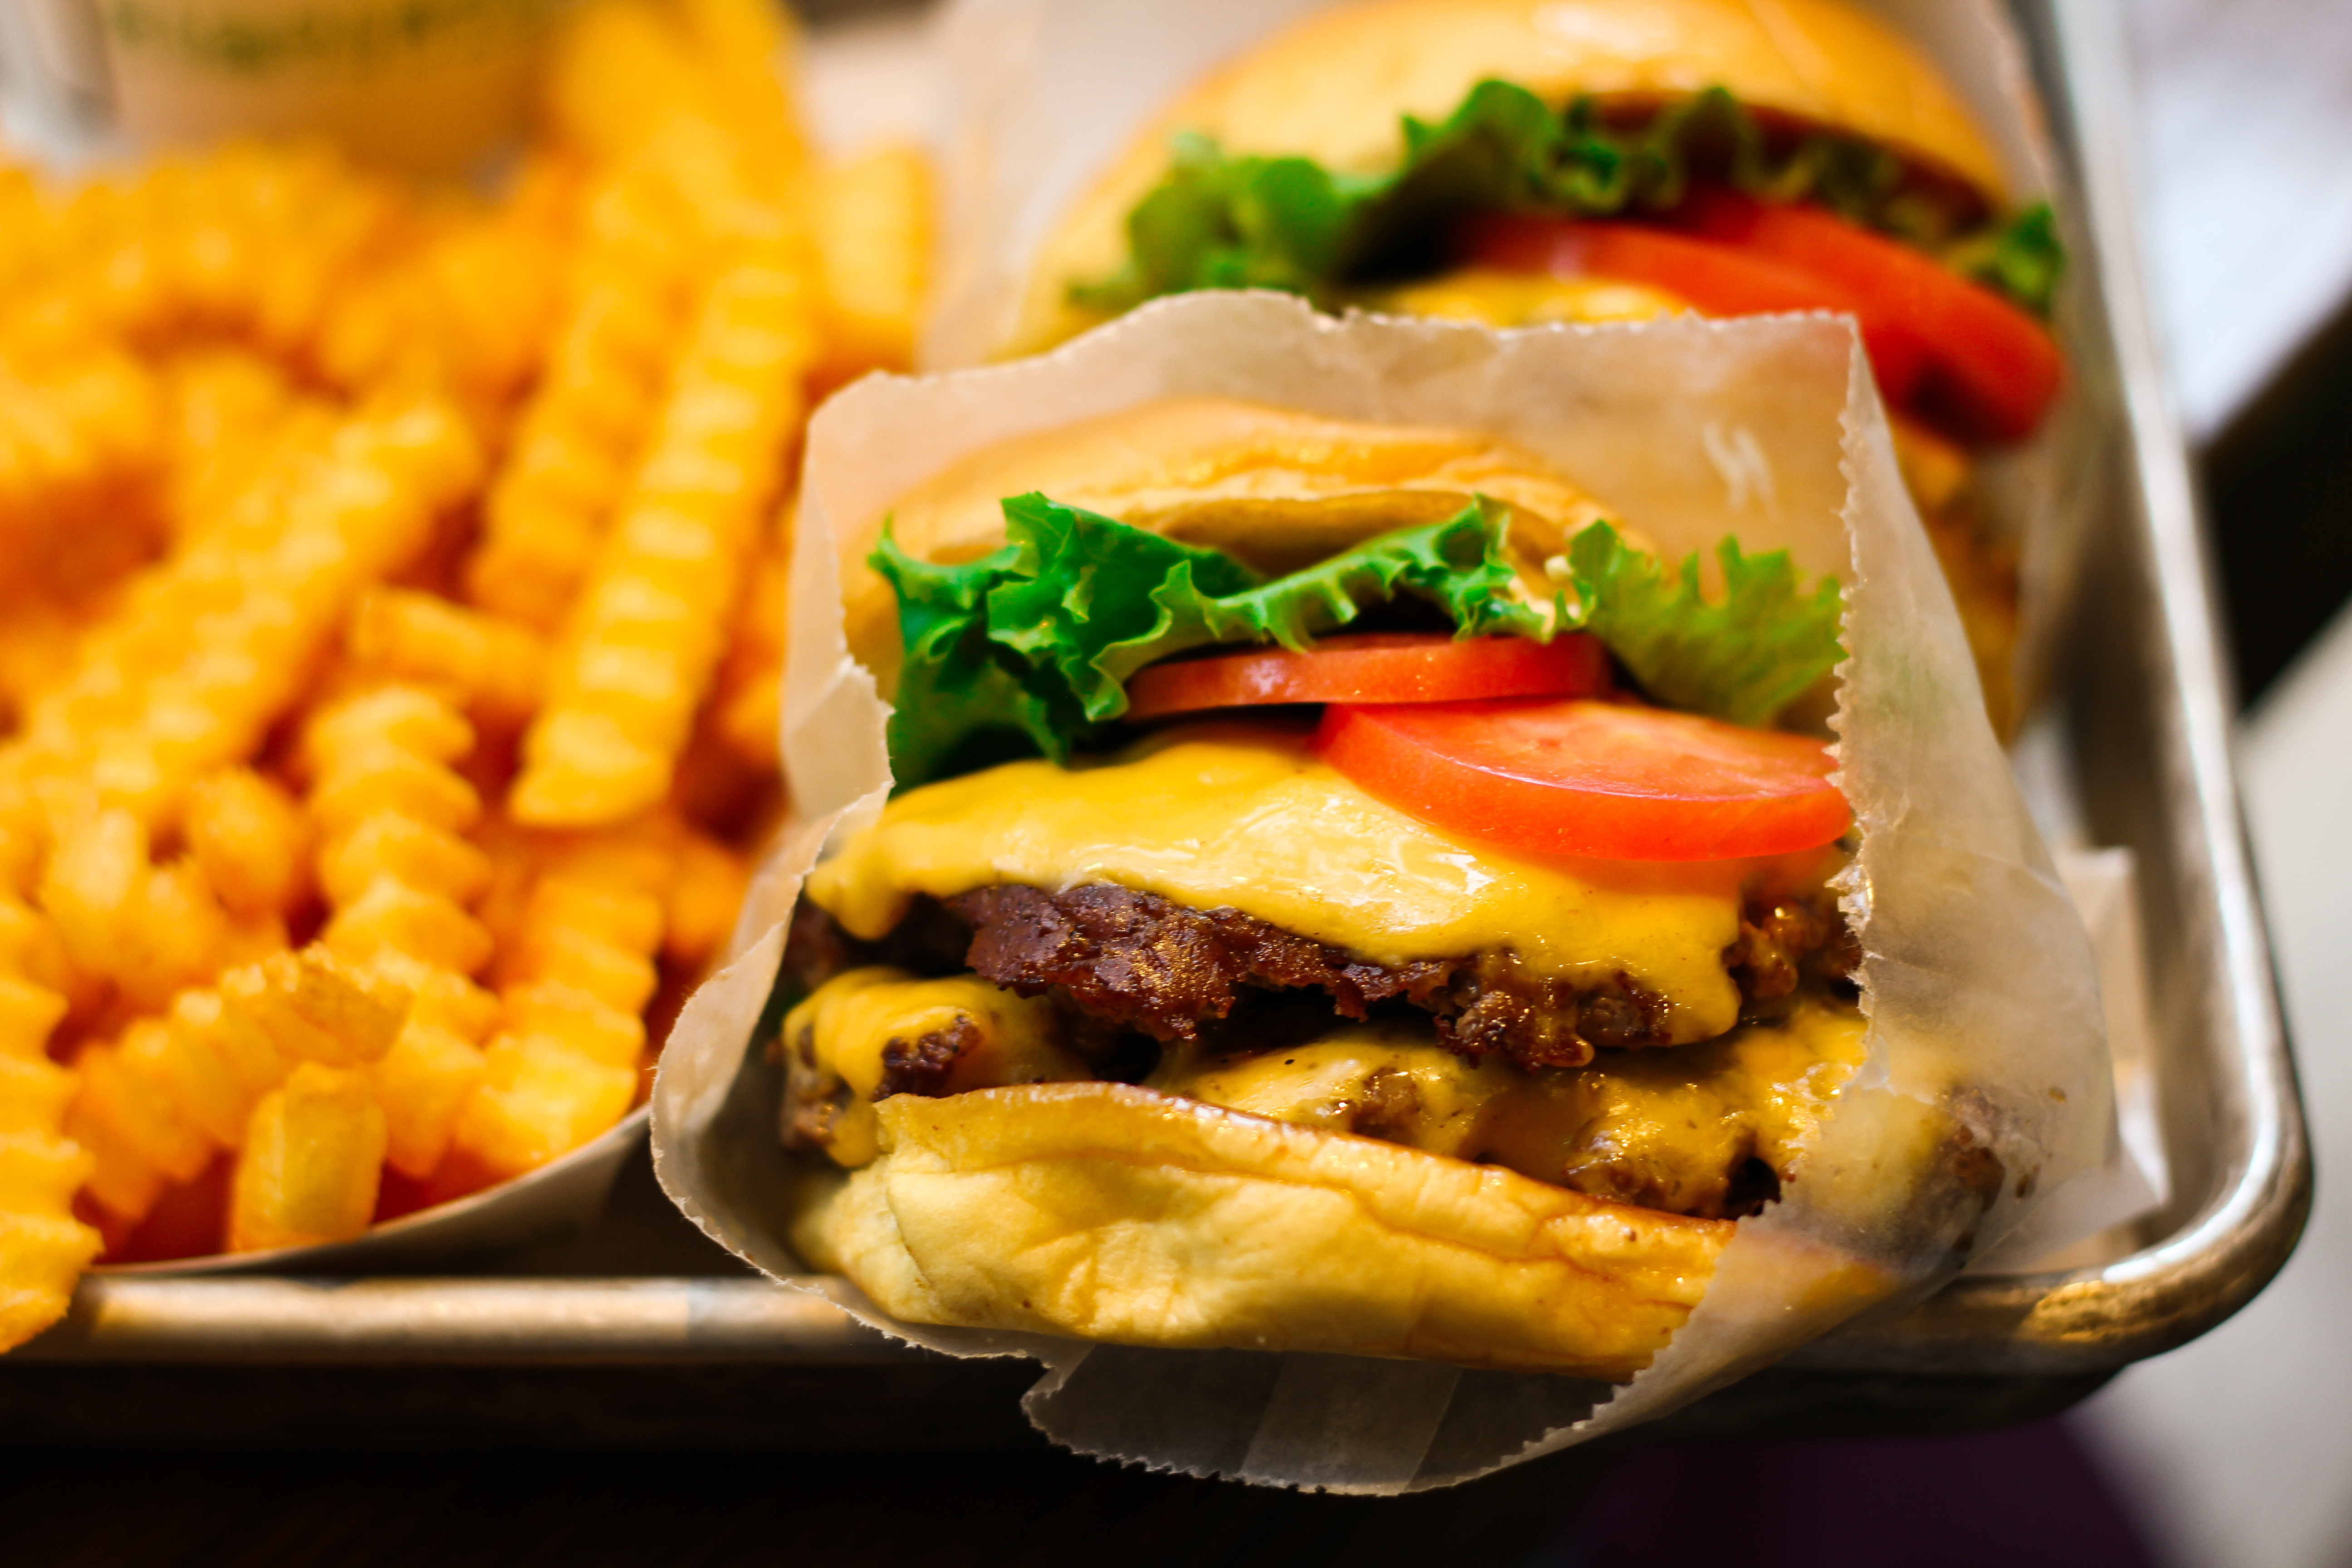 Free Shake Shack Today EVERYWHERE (Act Fast, 1st 100 People Only)